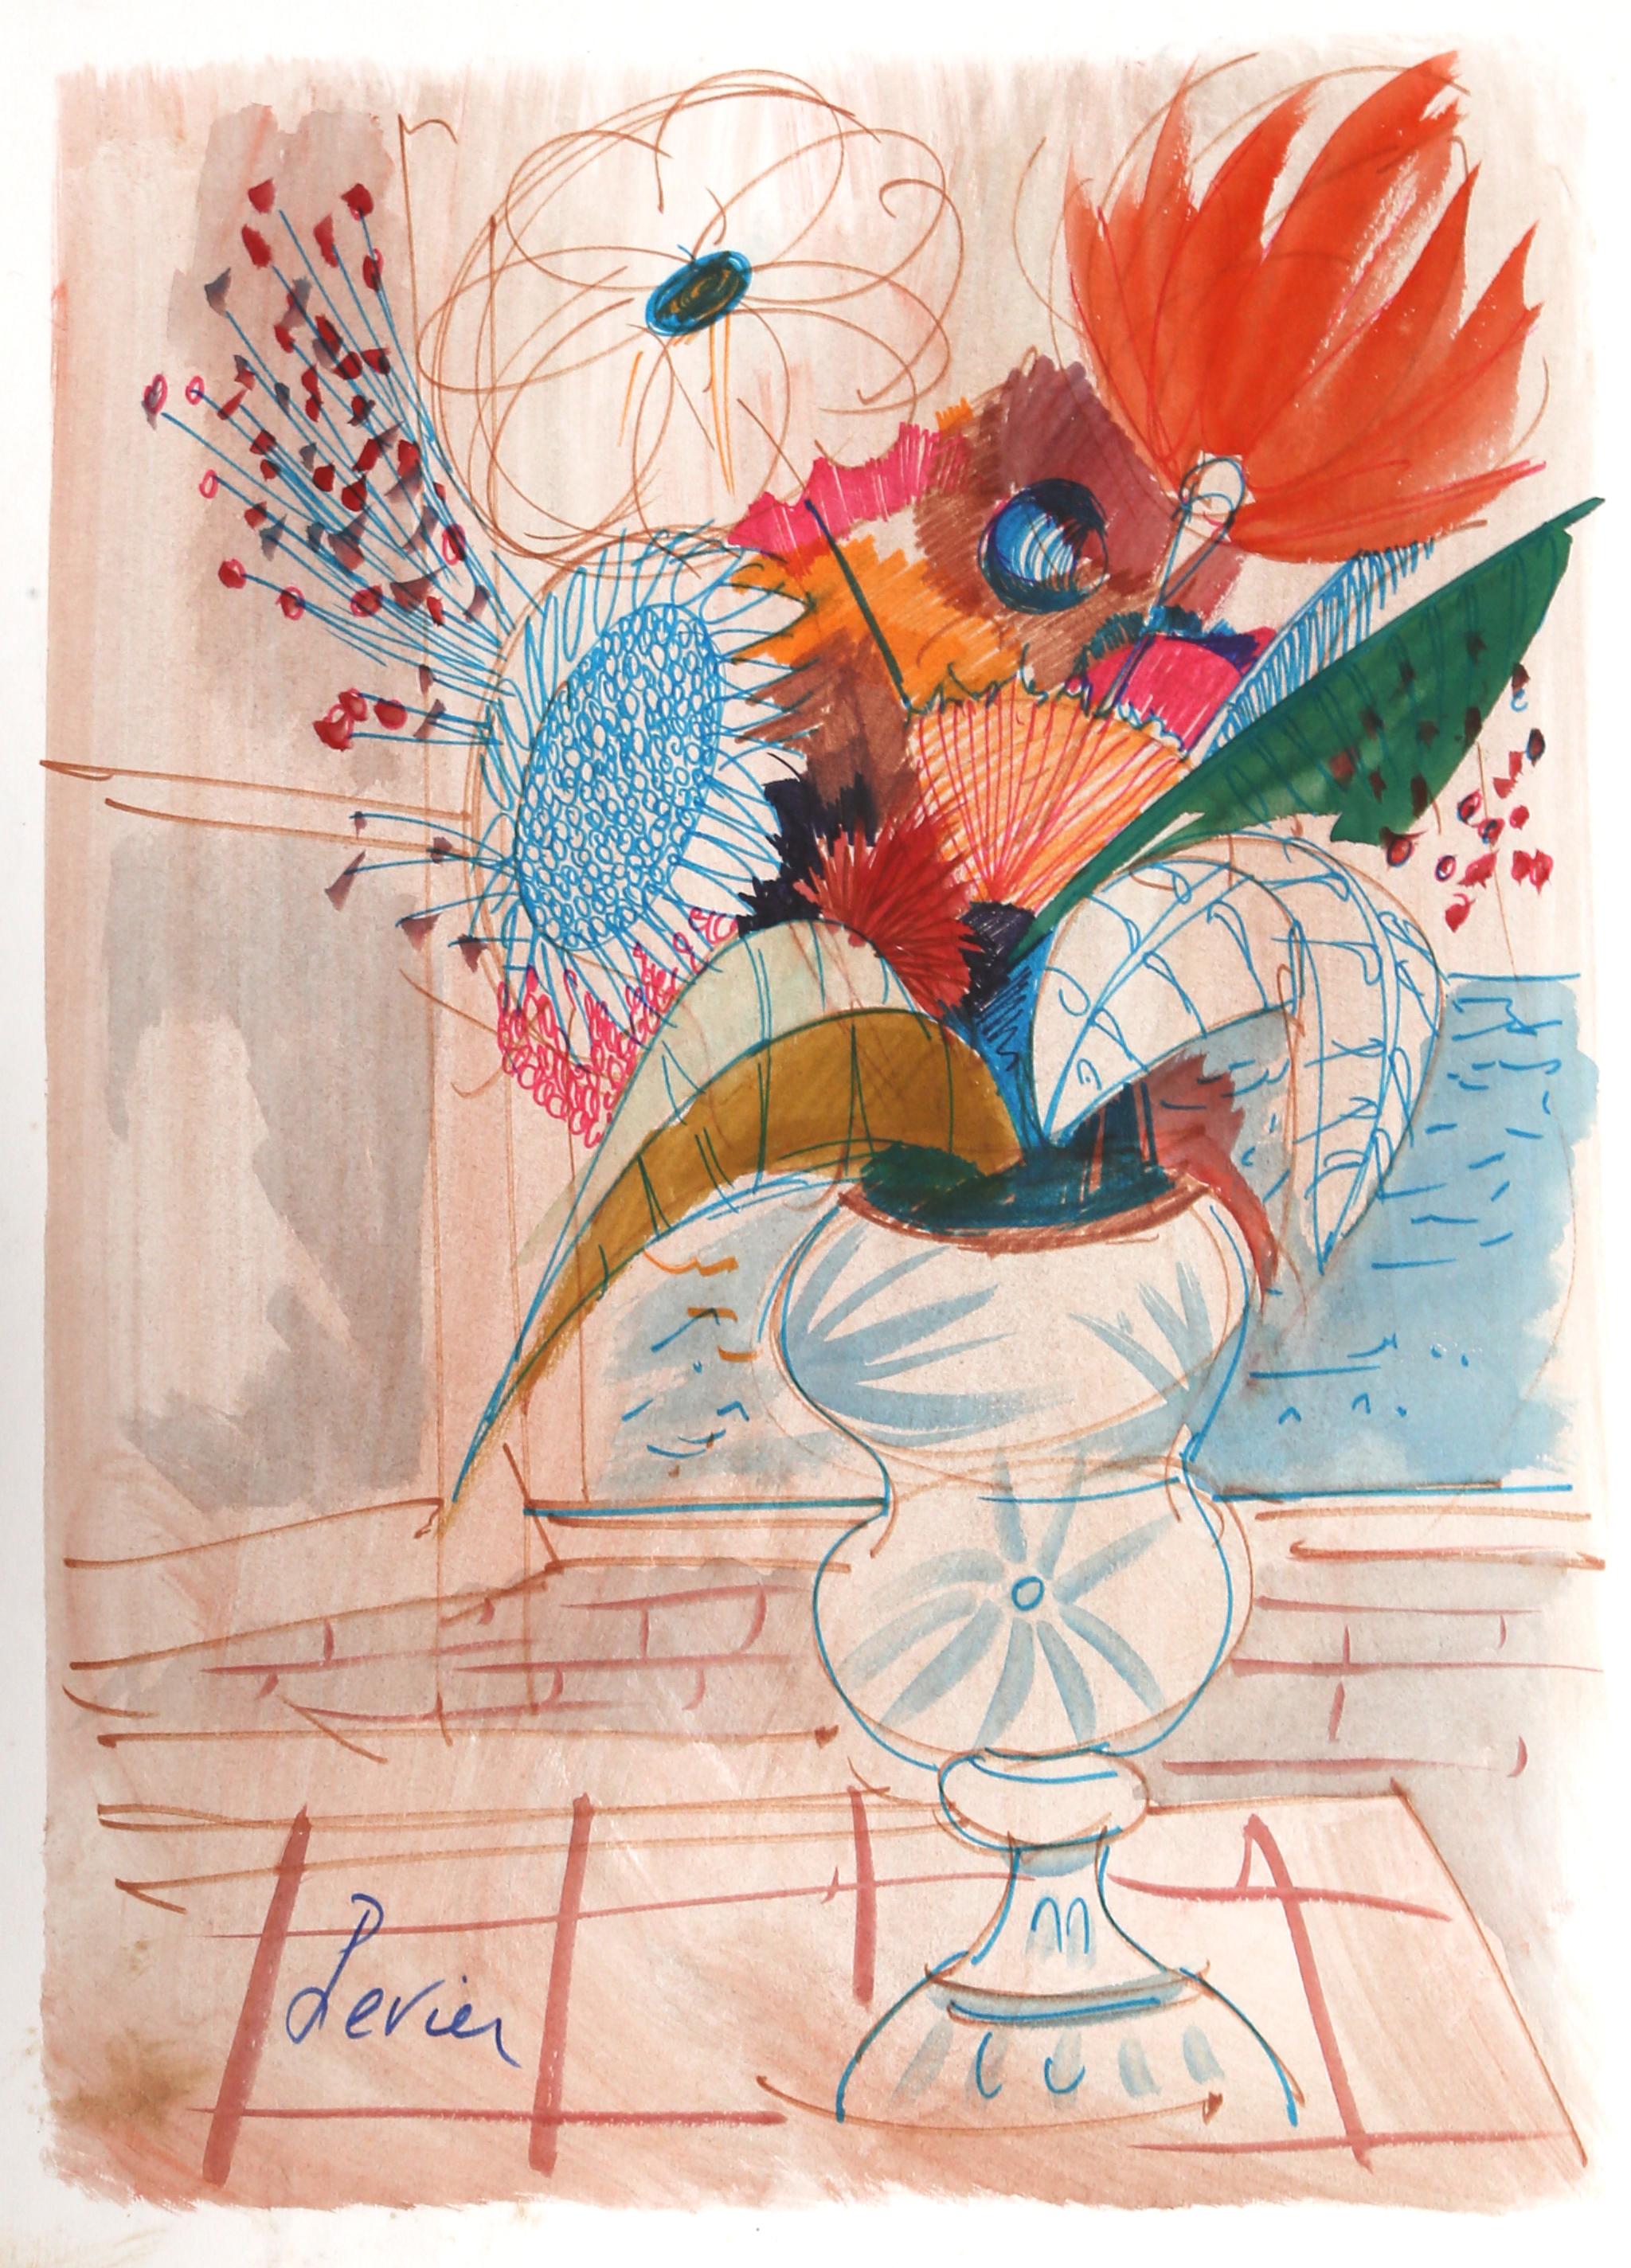 Artist: Charles Levier, French (1920 - 2003)
Title: Pink Vase
Year: circa 1970
Medium: Watercolor on paper, signed l.l.
Size: 16 x 11 inches
Paper Size: 25 x 19.5 in. (63.5 x 49.53 cm)